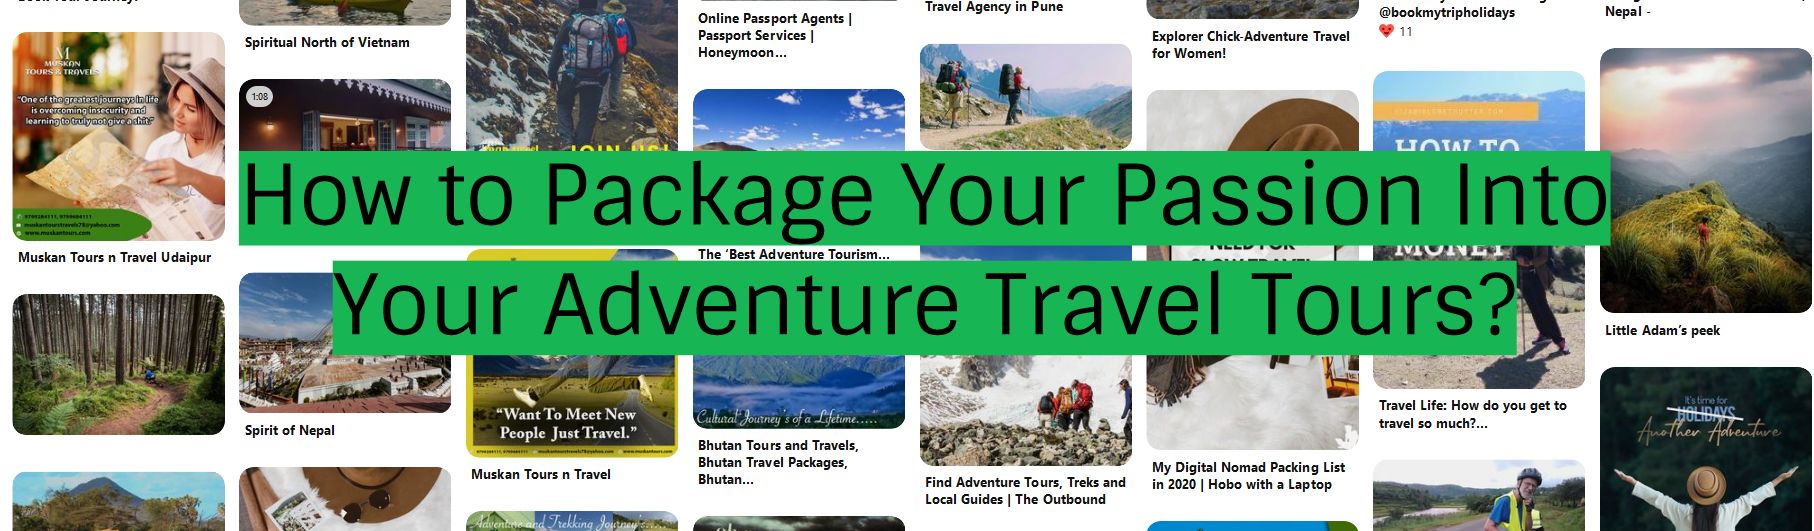 How to Package Your Passion Into Your Adventure Travel